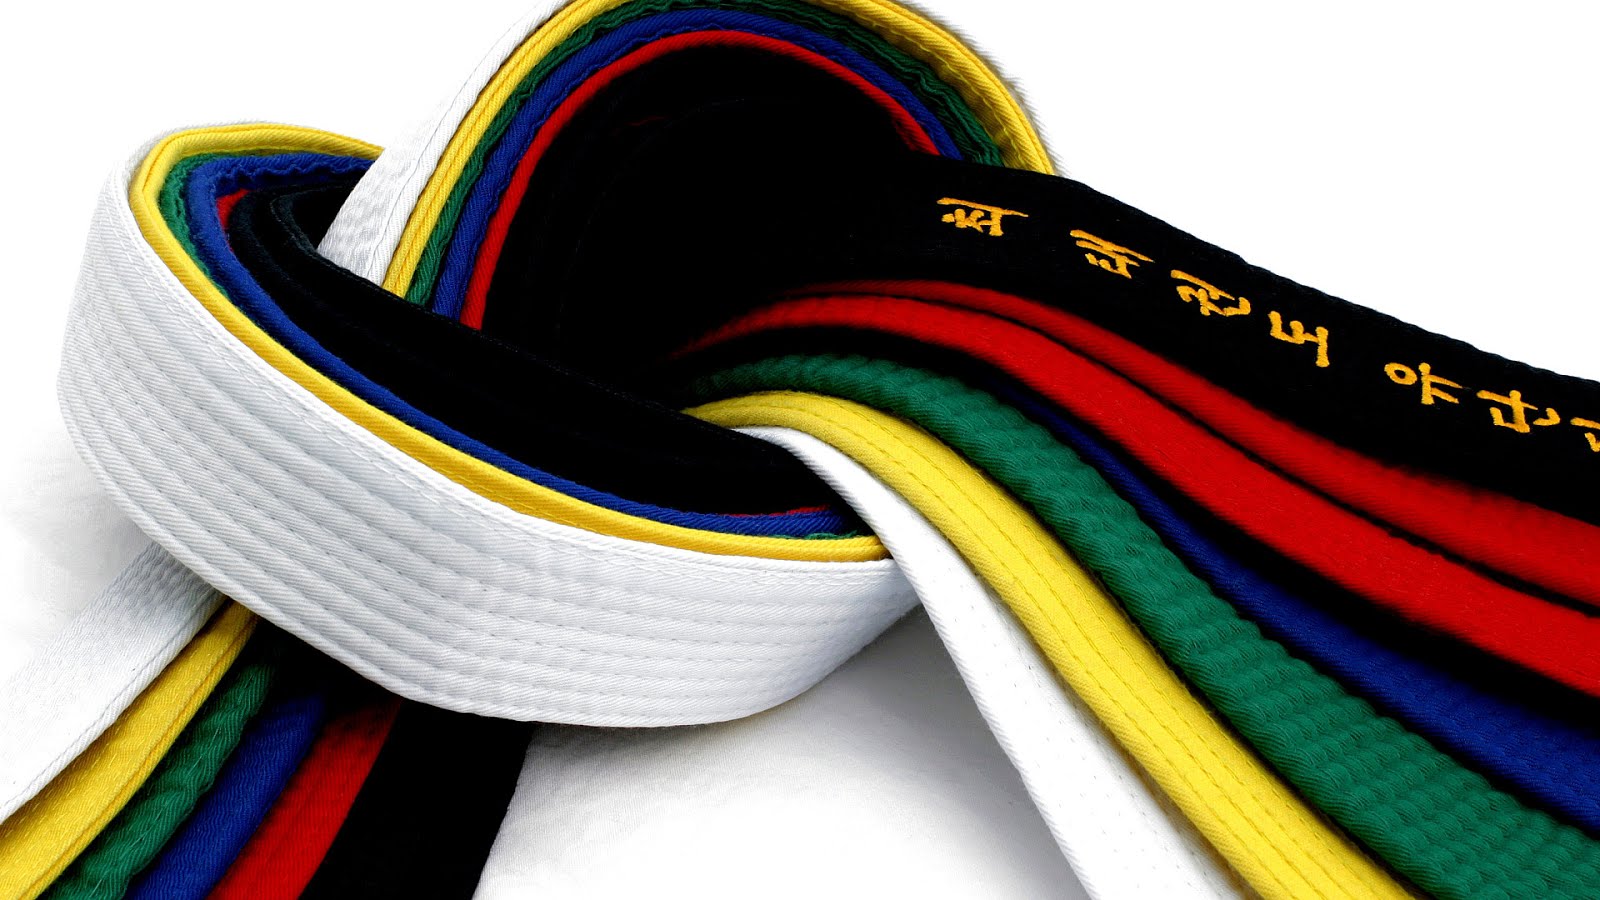 Karate Belts In Order From White To Black - Karate Choices